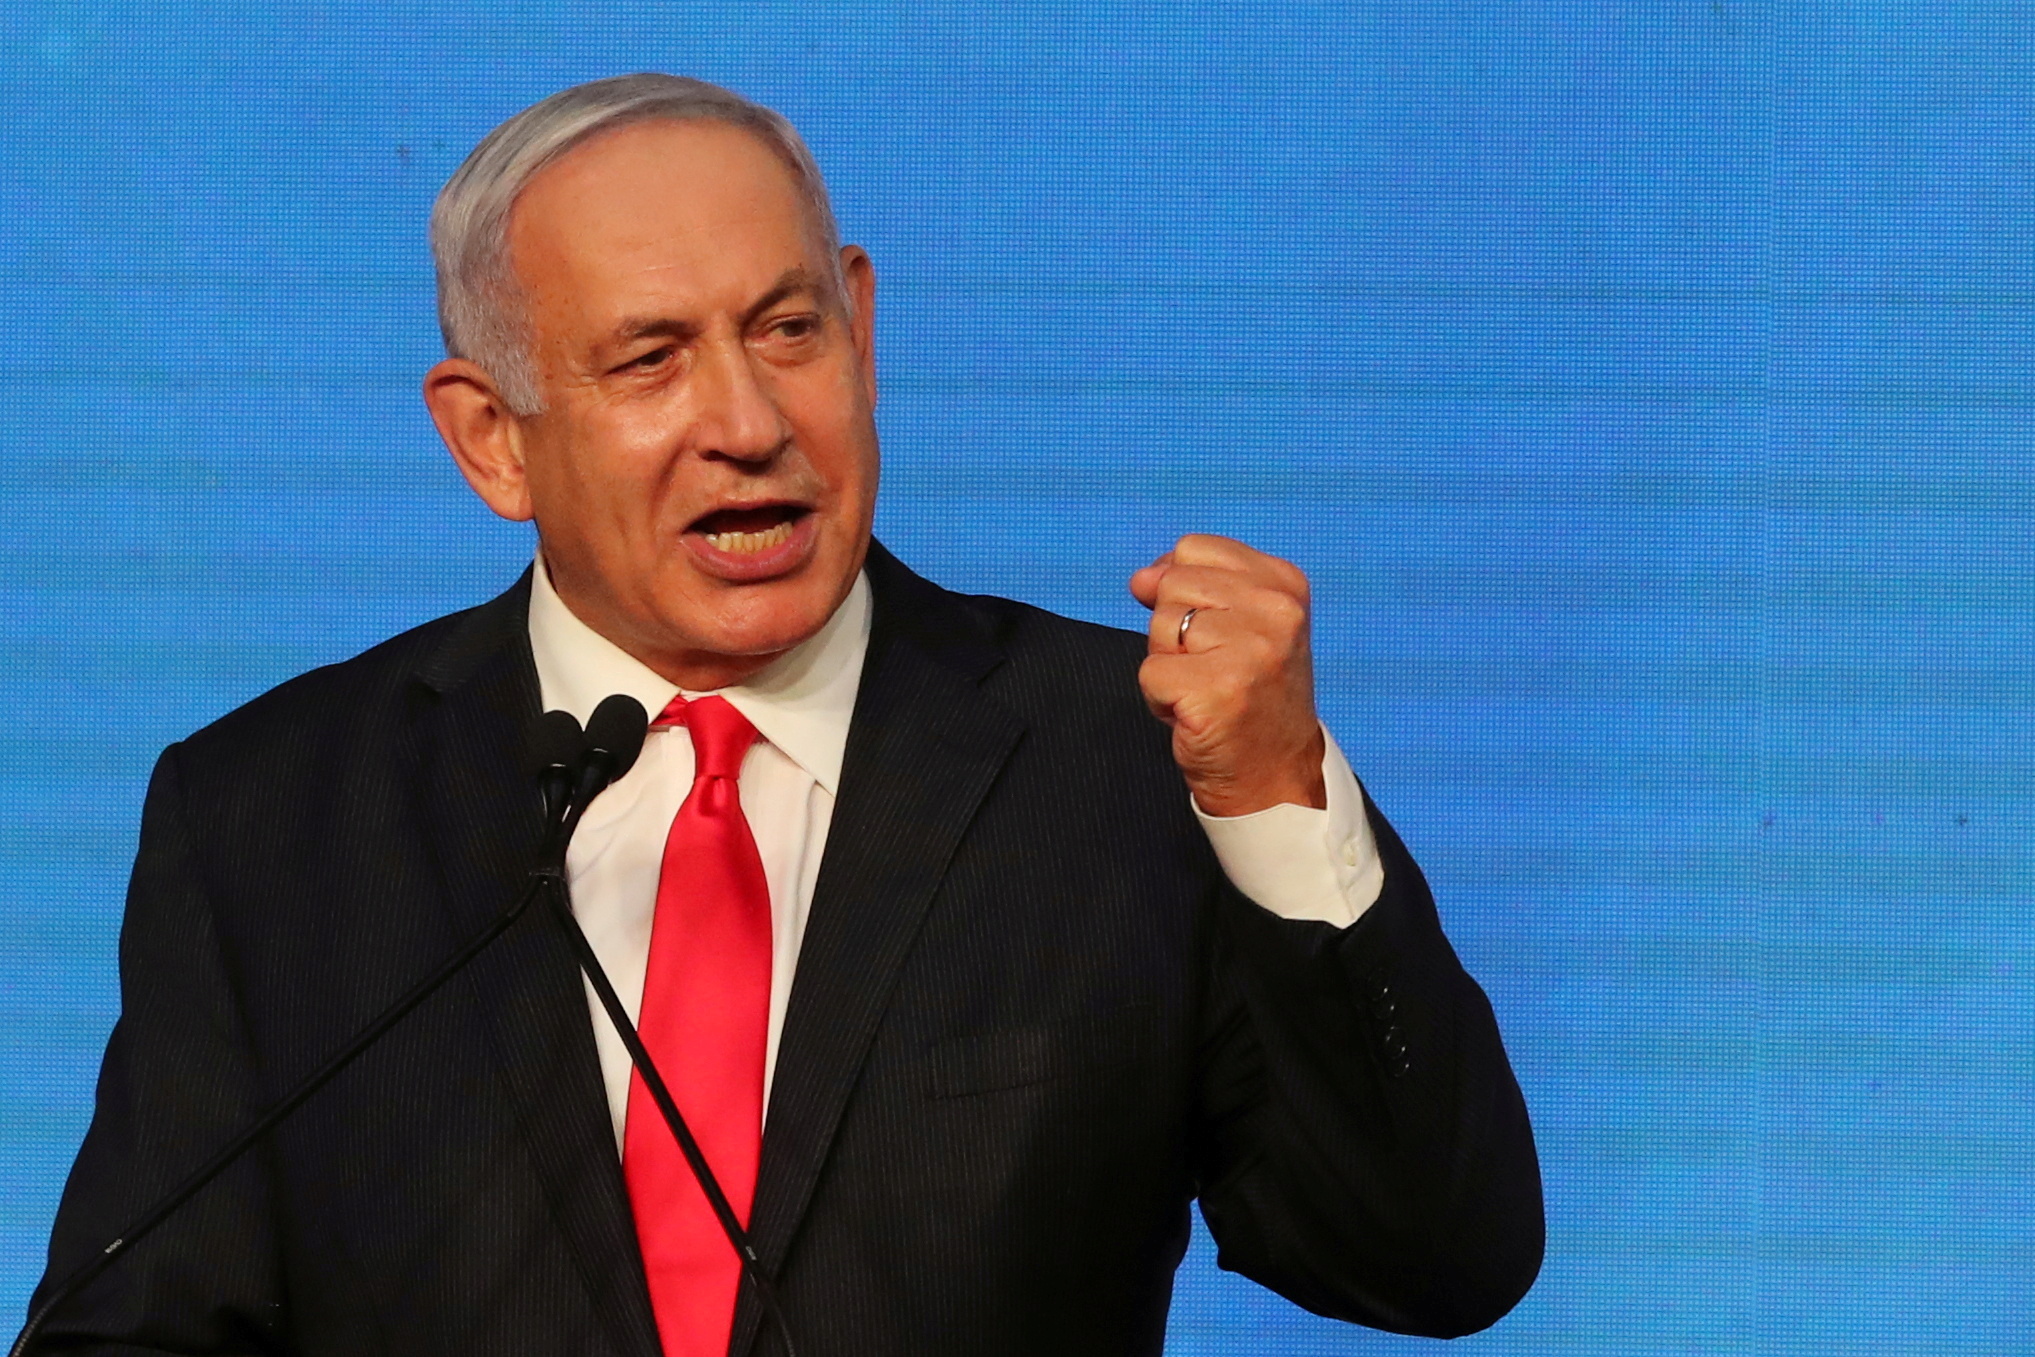 Israeli Prime Minister Benjamin Netanyahu gestures as he delivers a speech to supporters following the announcement of exit polls in Israel's general election at his Likud party headquarters in Jerusalem